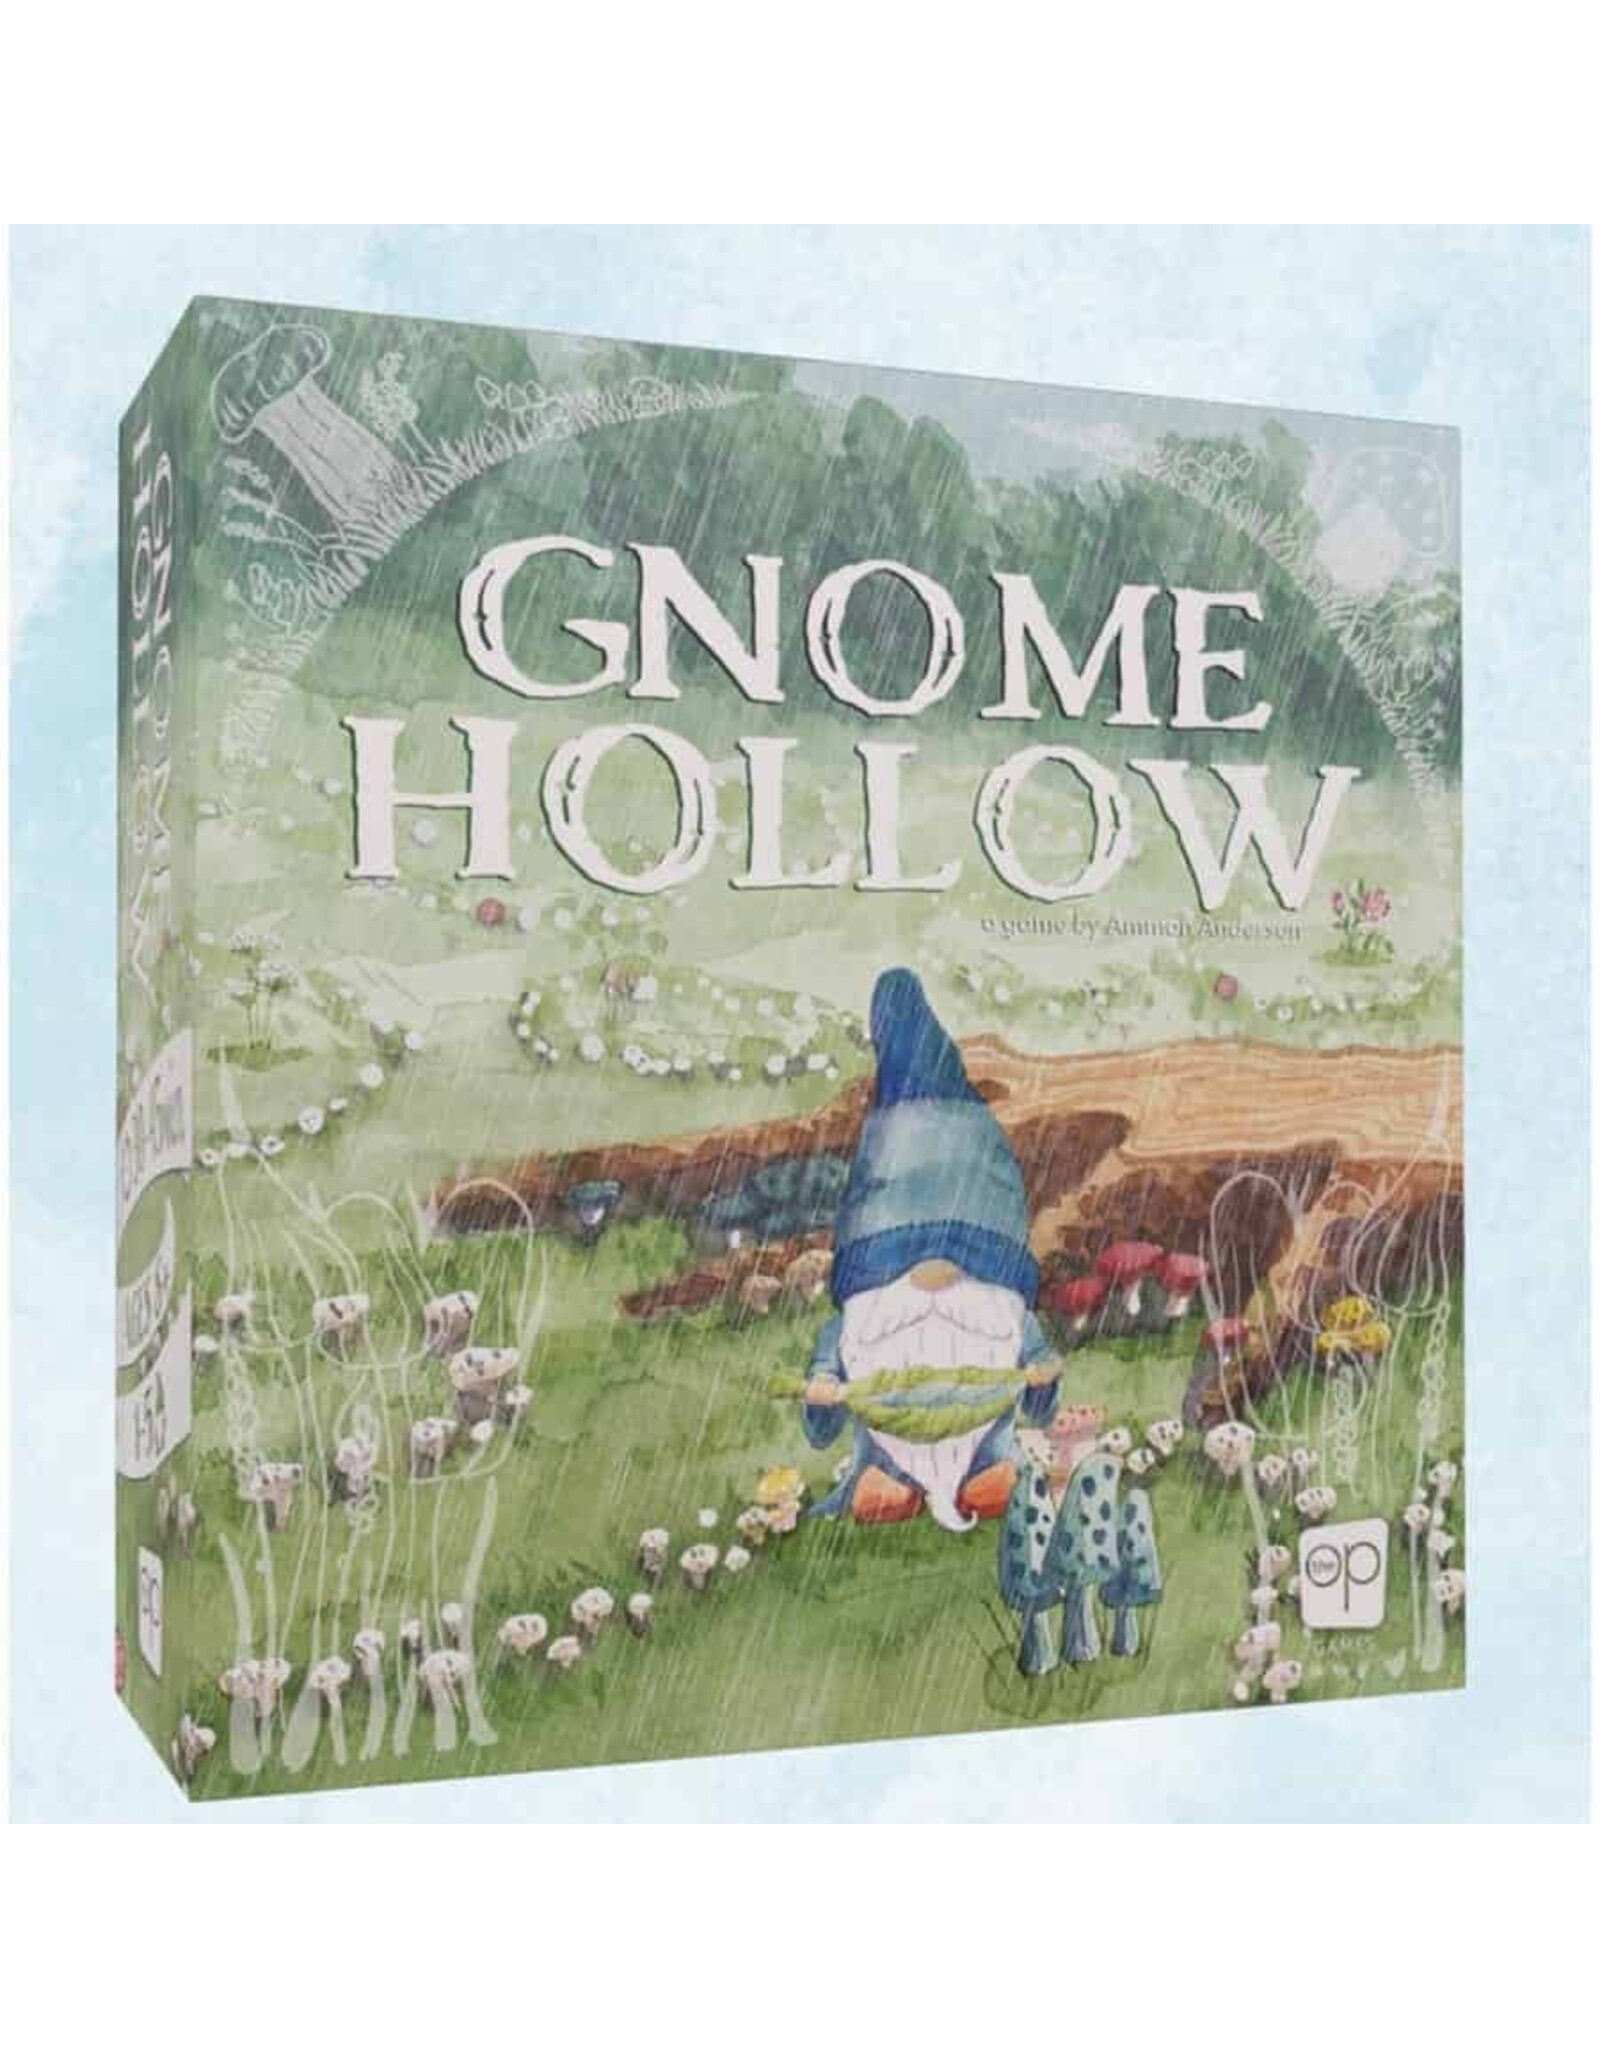 The OP Gnome Hollow